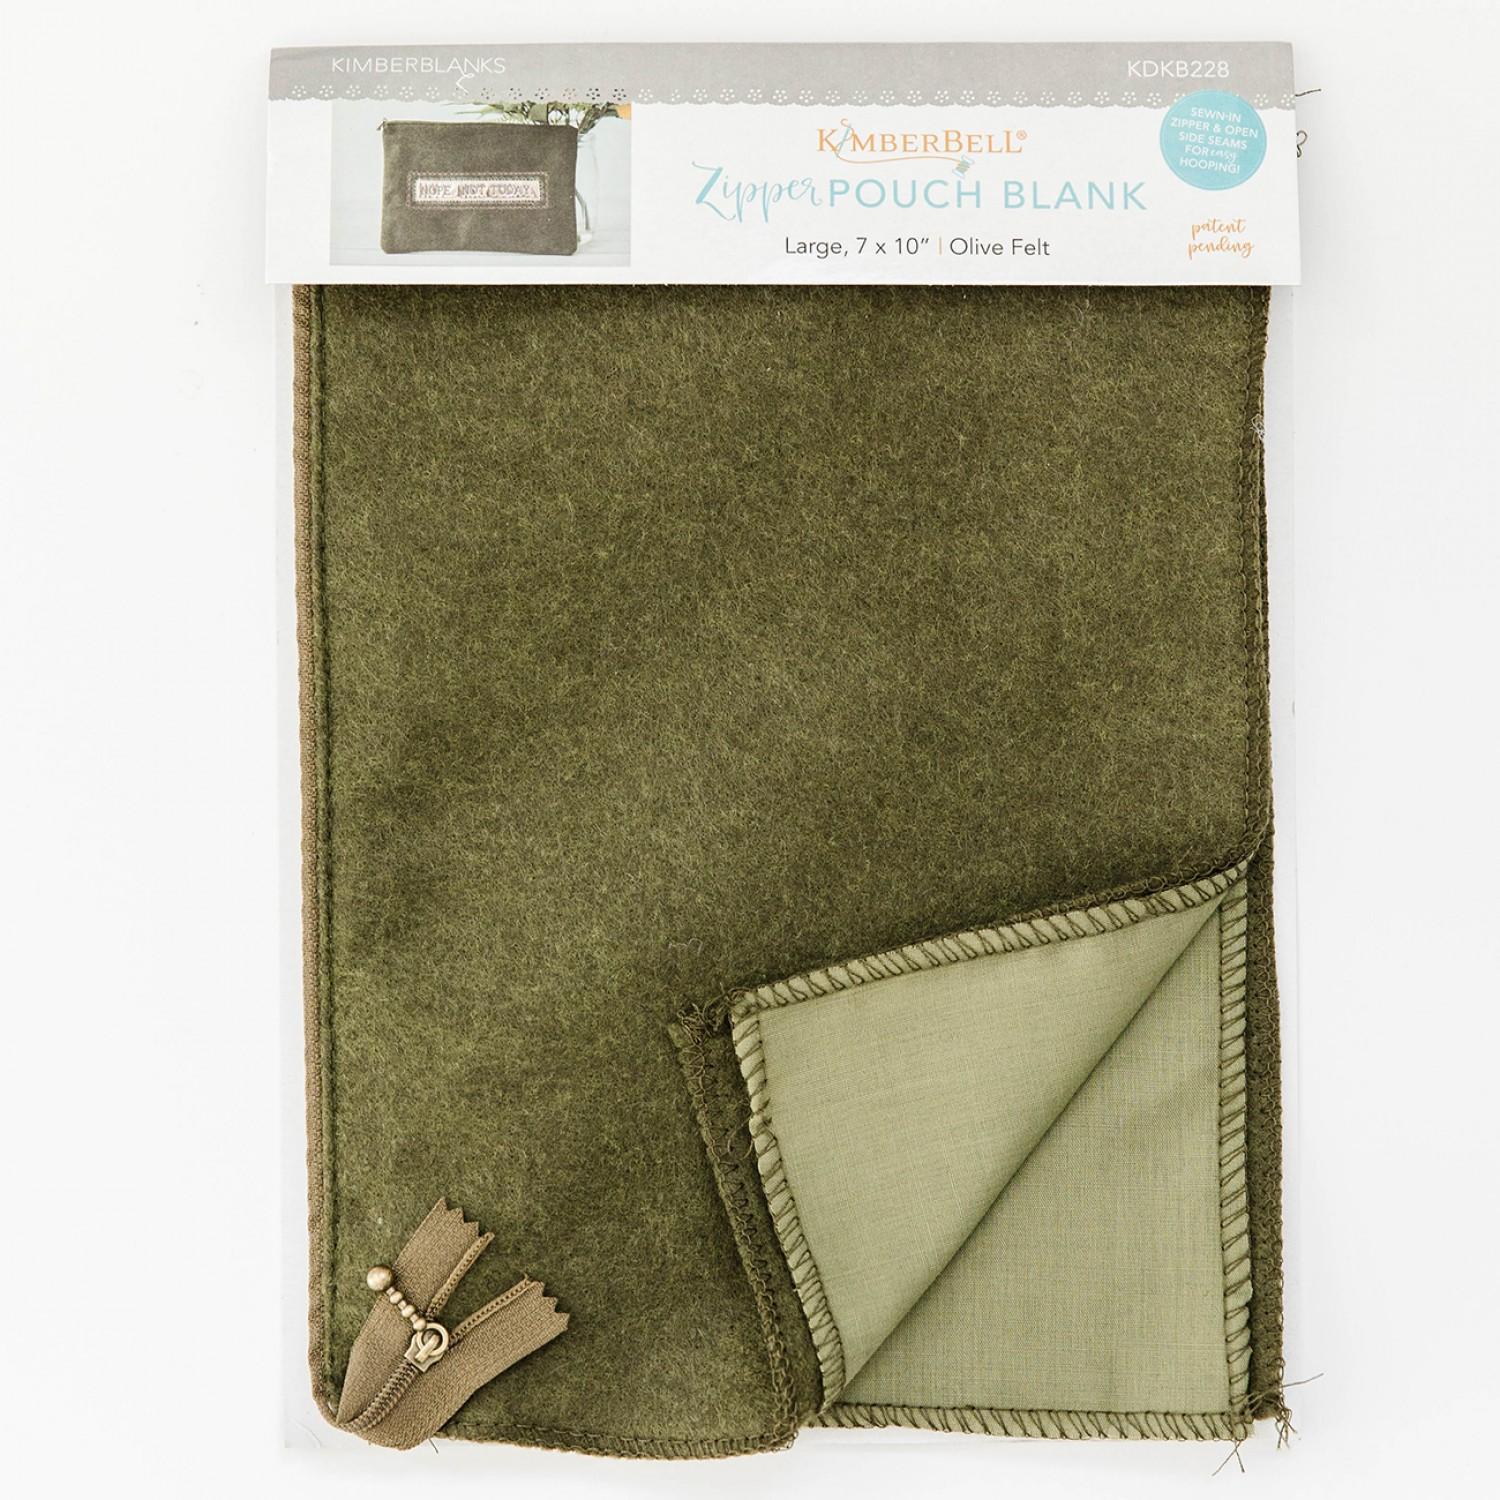 Zipper Pouch Blank Olive Felt Large # KDKB228 - SPECIAL ORDER